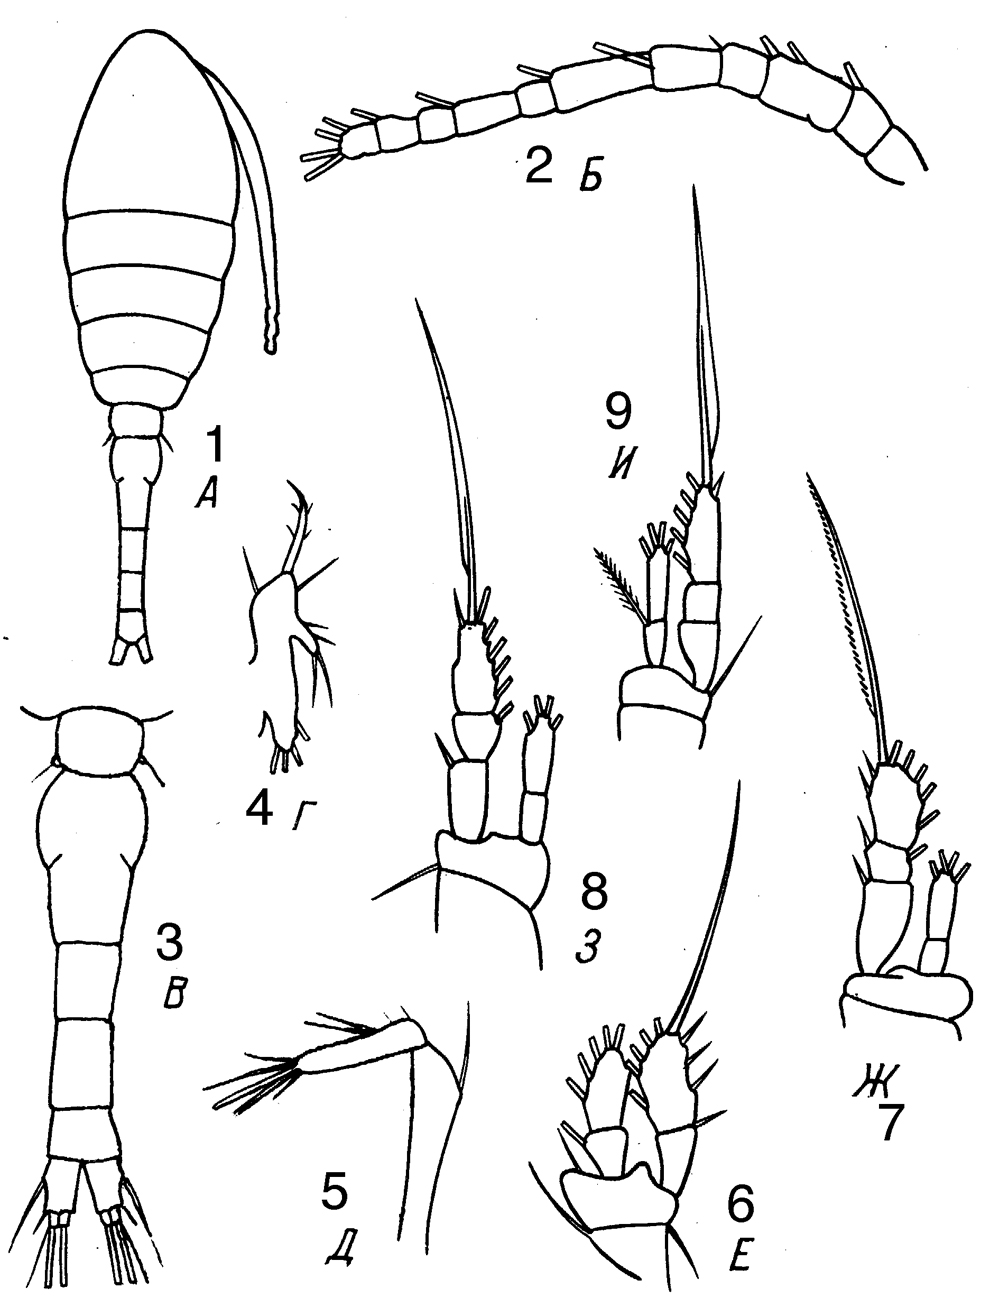 Species Oithona pulla - Plate 3 of morphological figures